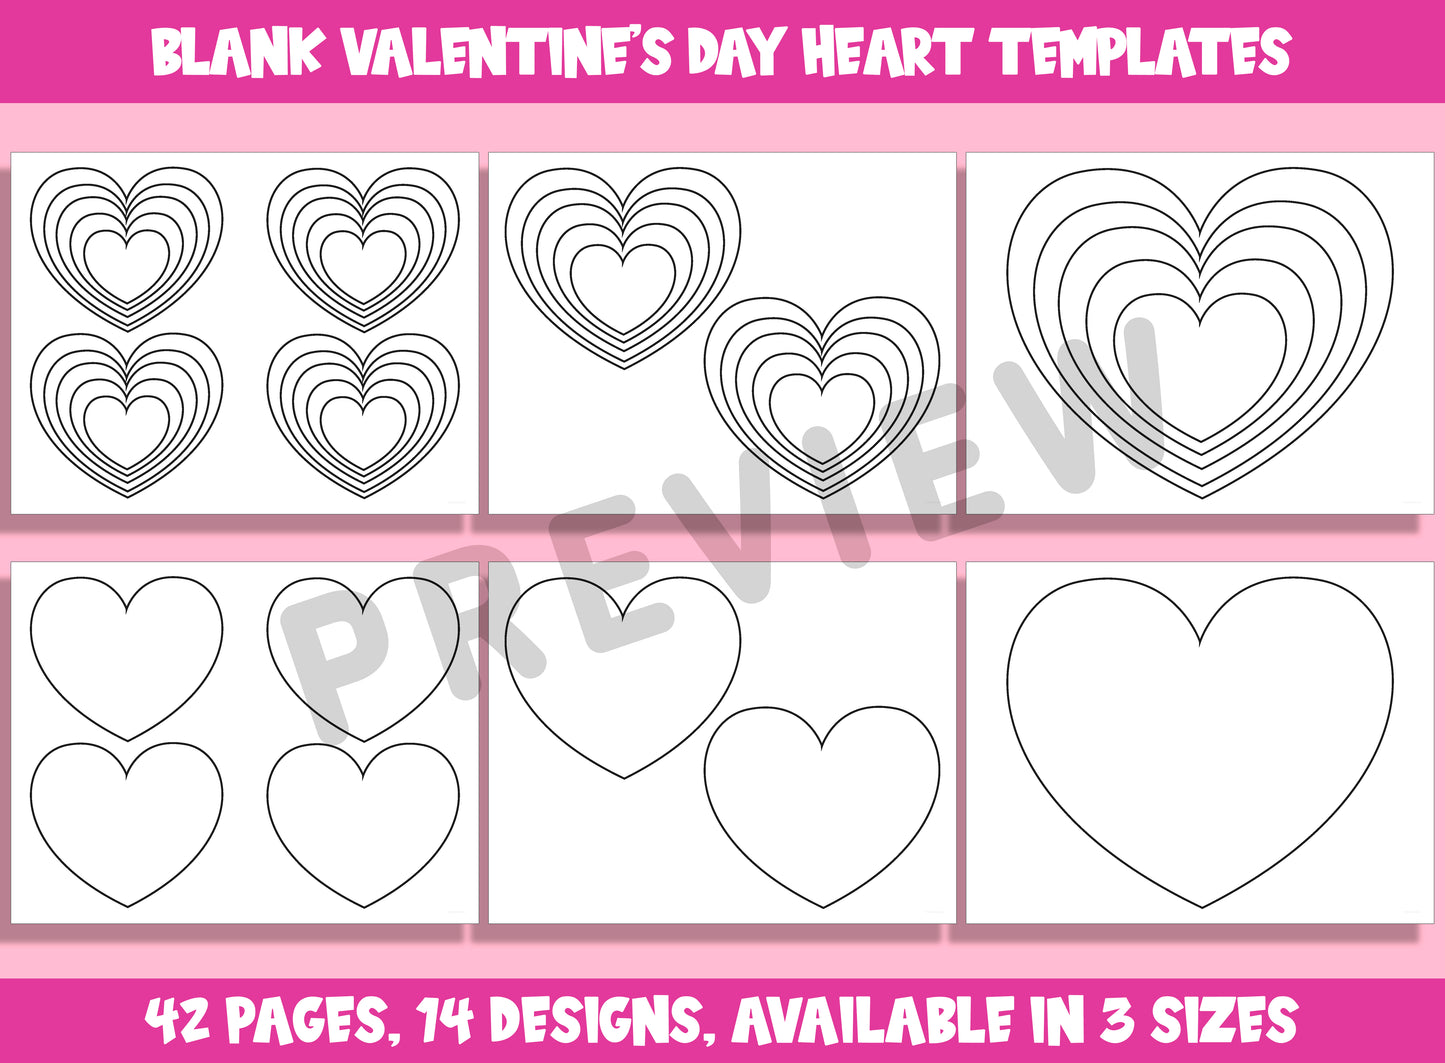 Blank Valentine's Day Heart Templates, Coloring Clipart Bundle, 42 Pages, 14 Designs, Available in 3 Sizes, PDF File, Instant Download